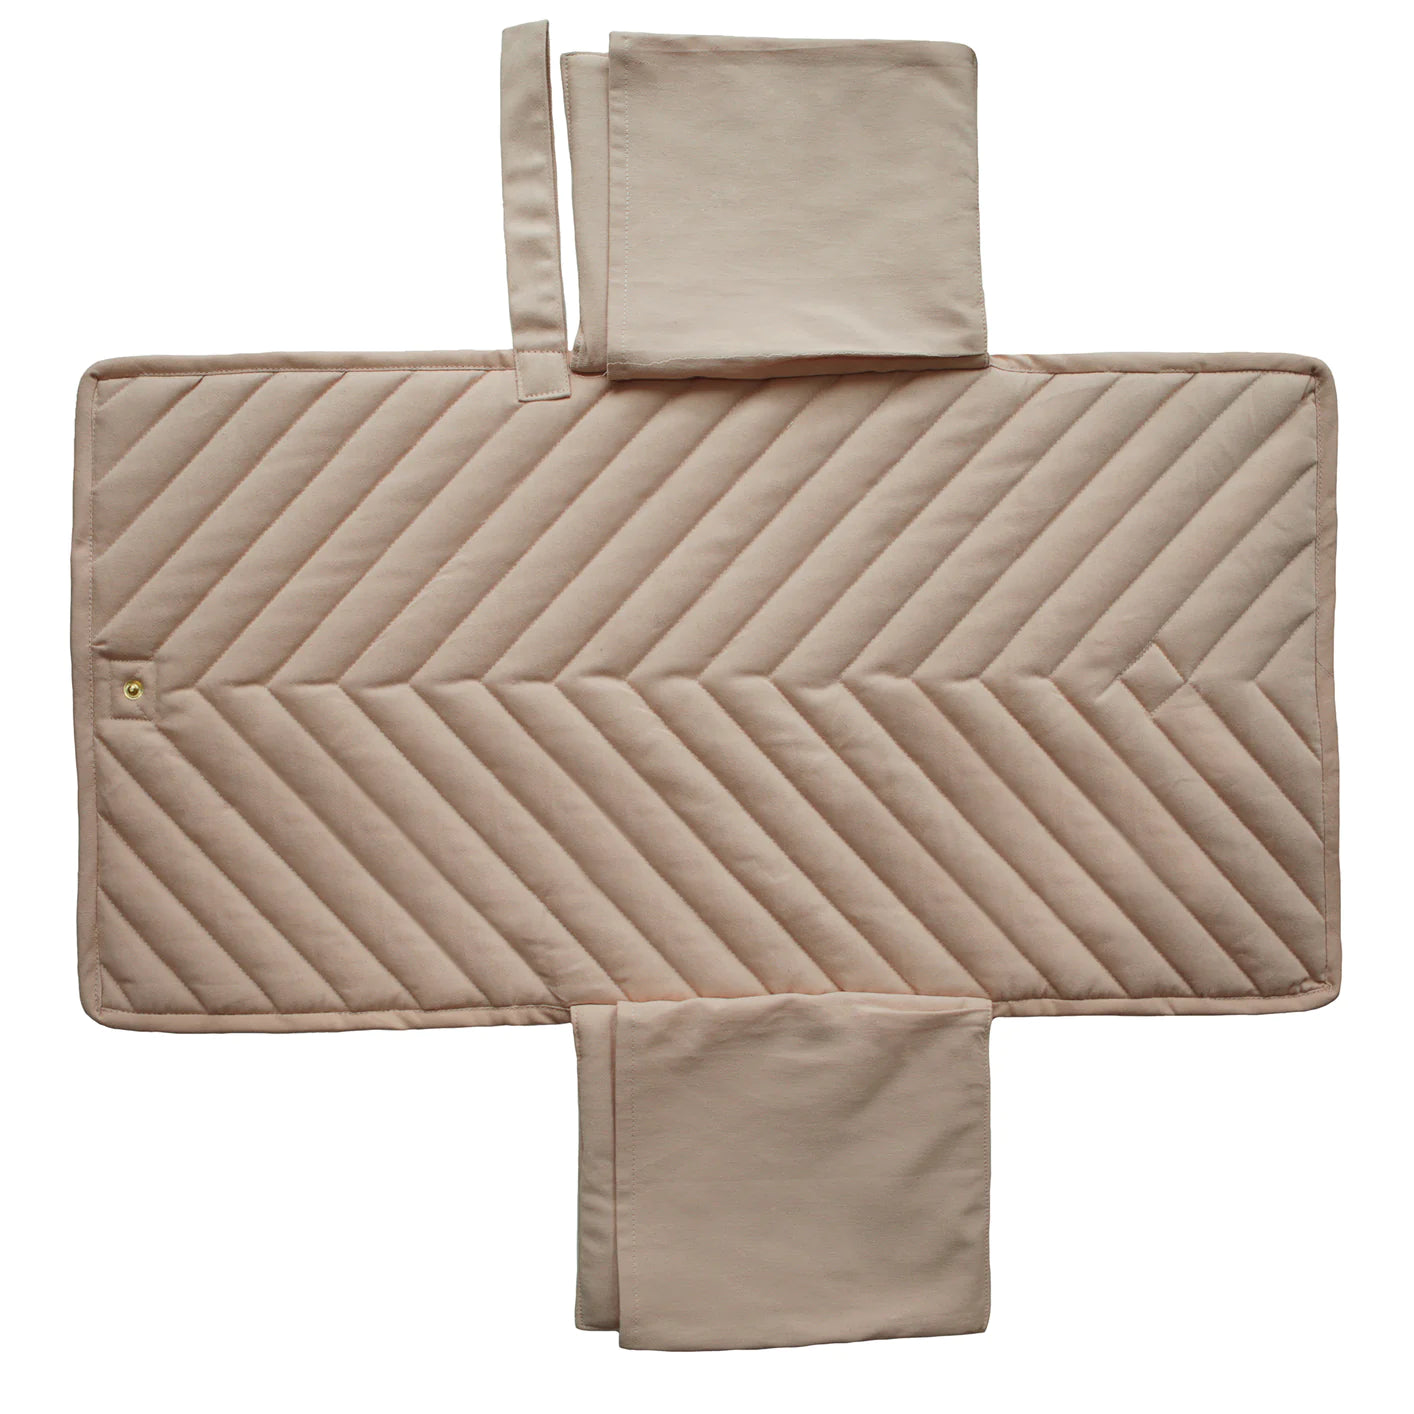 Quilted Portable Changing Pad - Natural